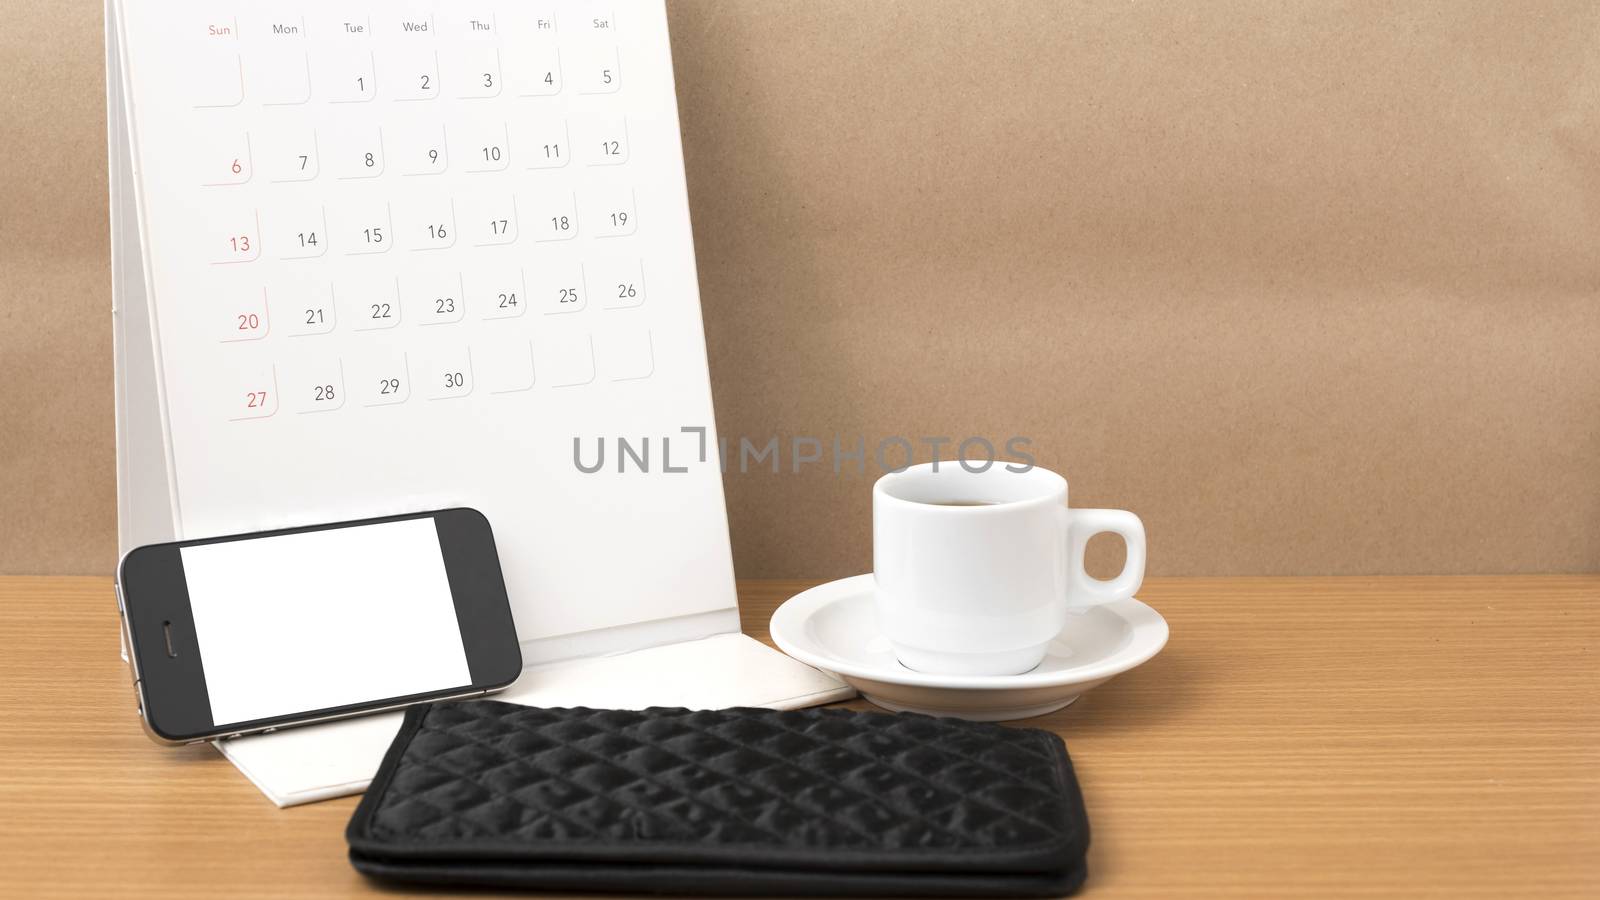 coffee,phone,wallet and canlendar on wood table background